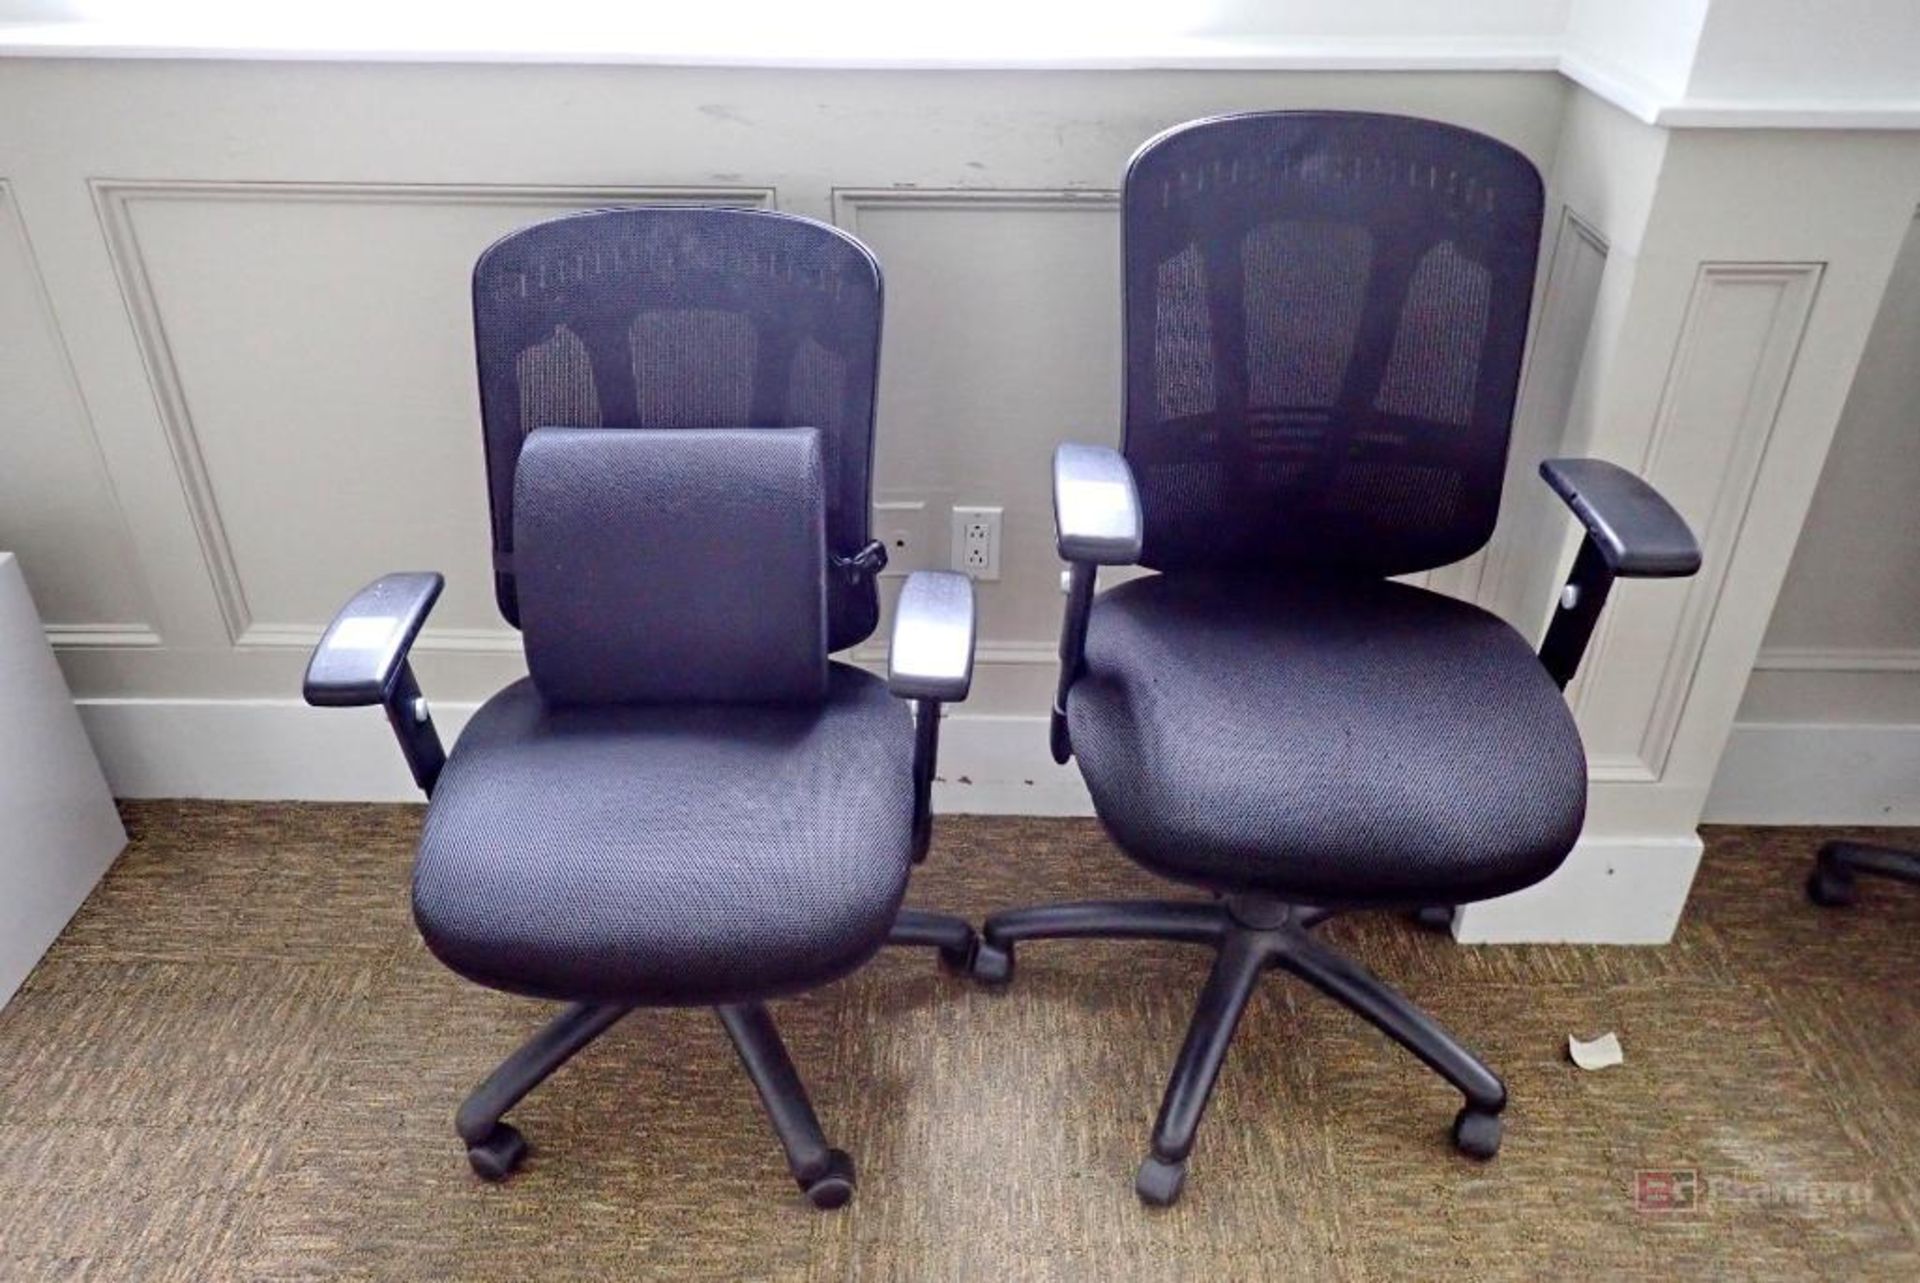 (2) Swivel Based Pneumatic Office Chairs